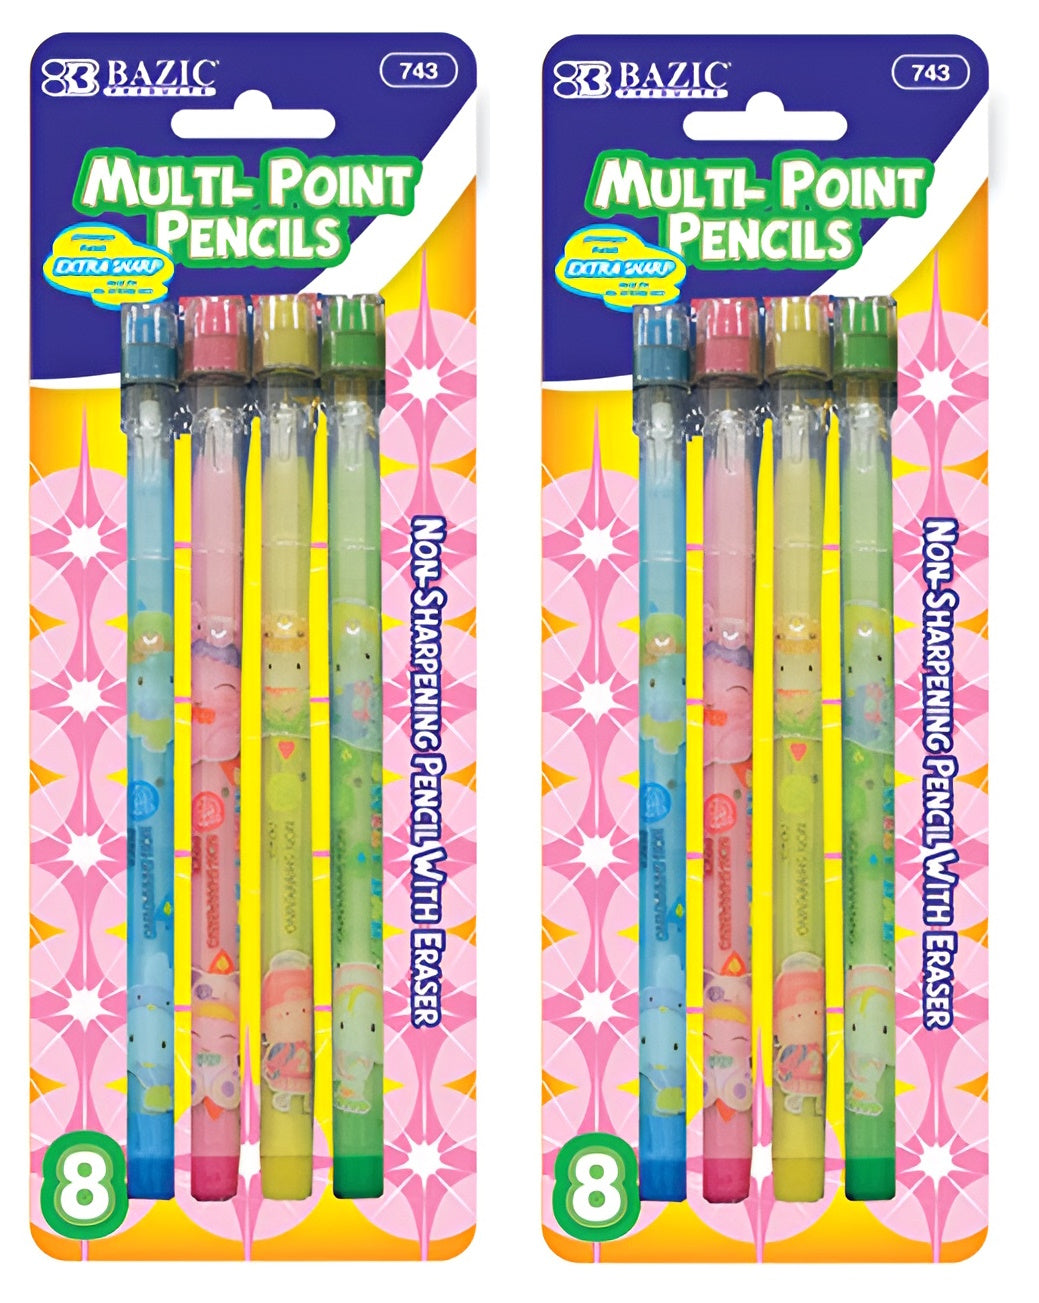 Fancy Multi-Point Pencil (8/Pack) new, sharp and ready to use pencils, School, Home, Office - 2 Pack